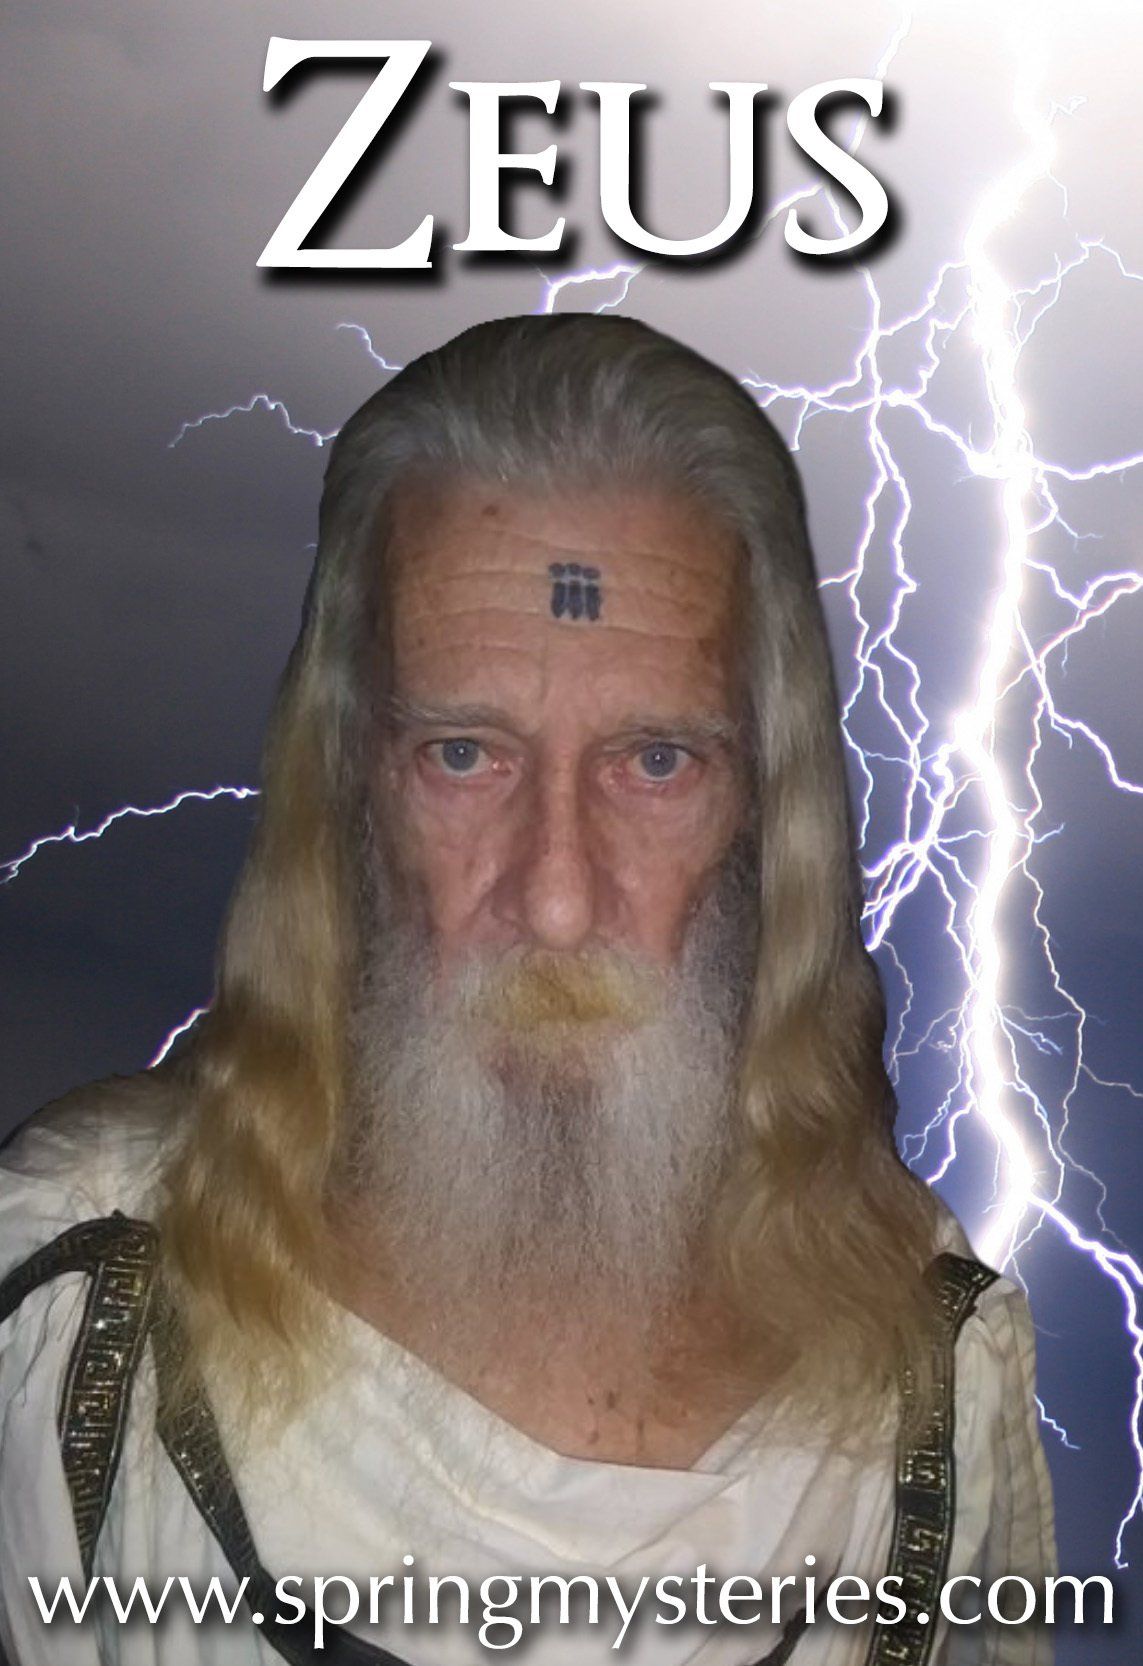 A man with long hair and a beard is dressed as zeus